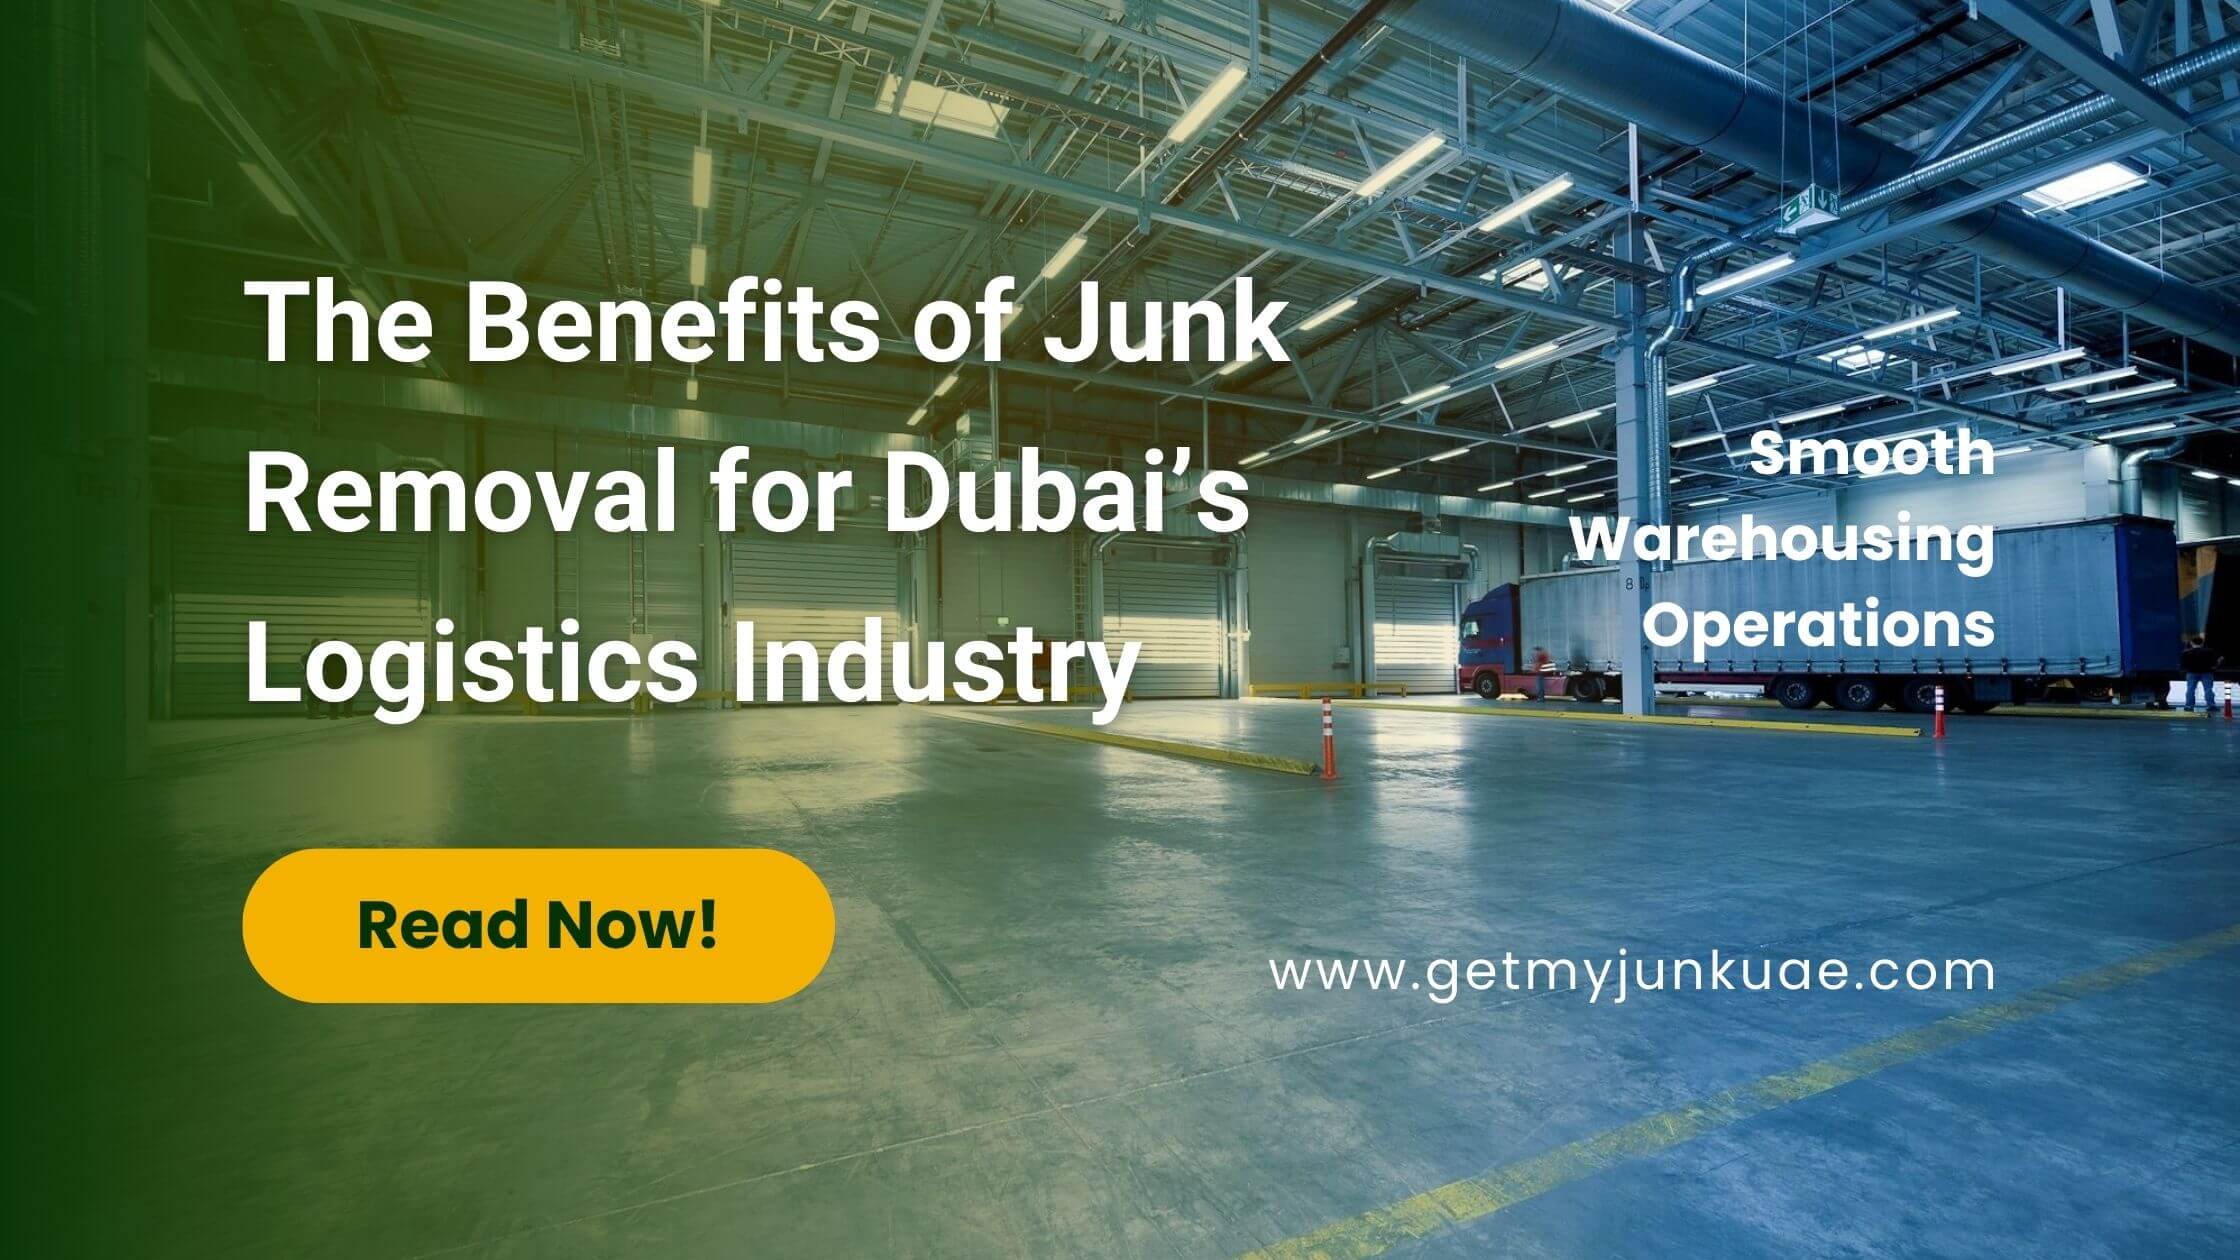 The Benefits of Junk Removal for Dubai’s Logistics Industry